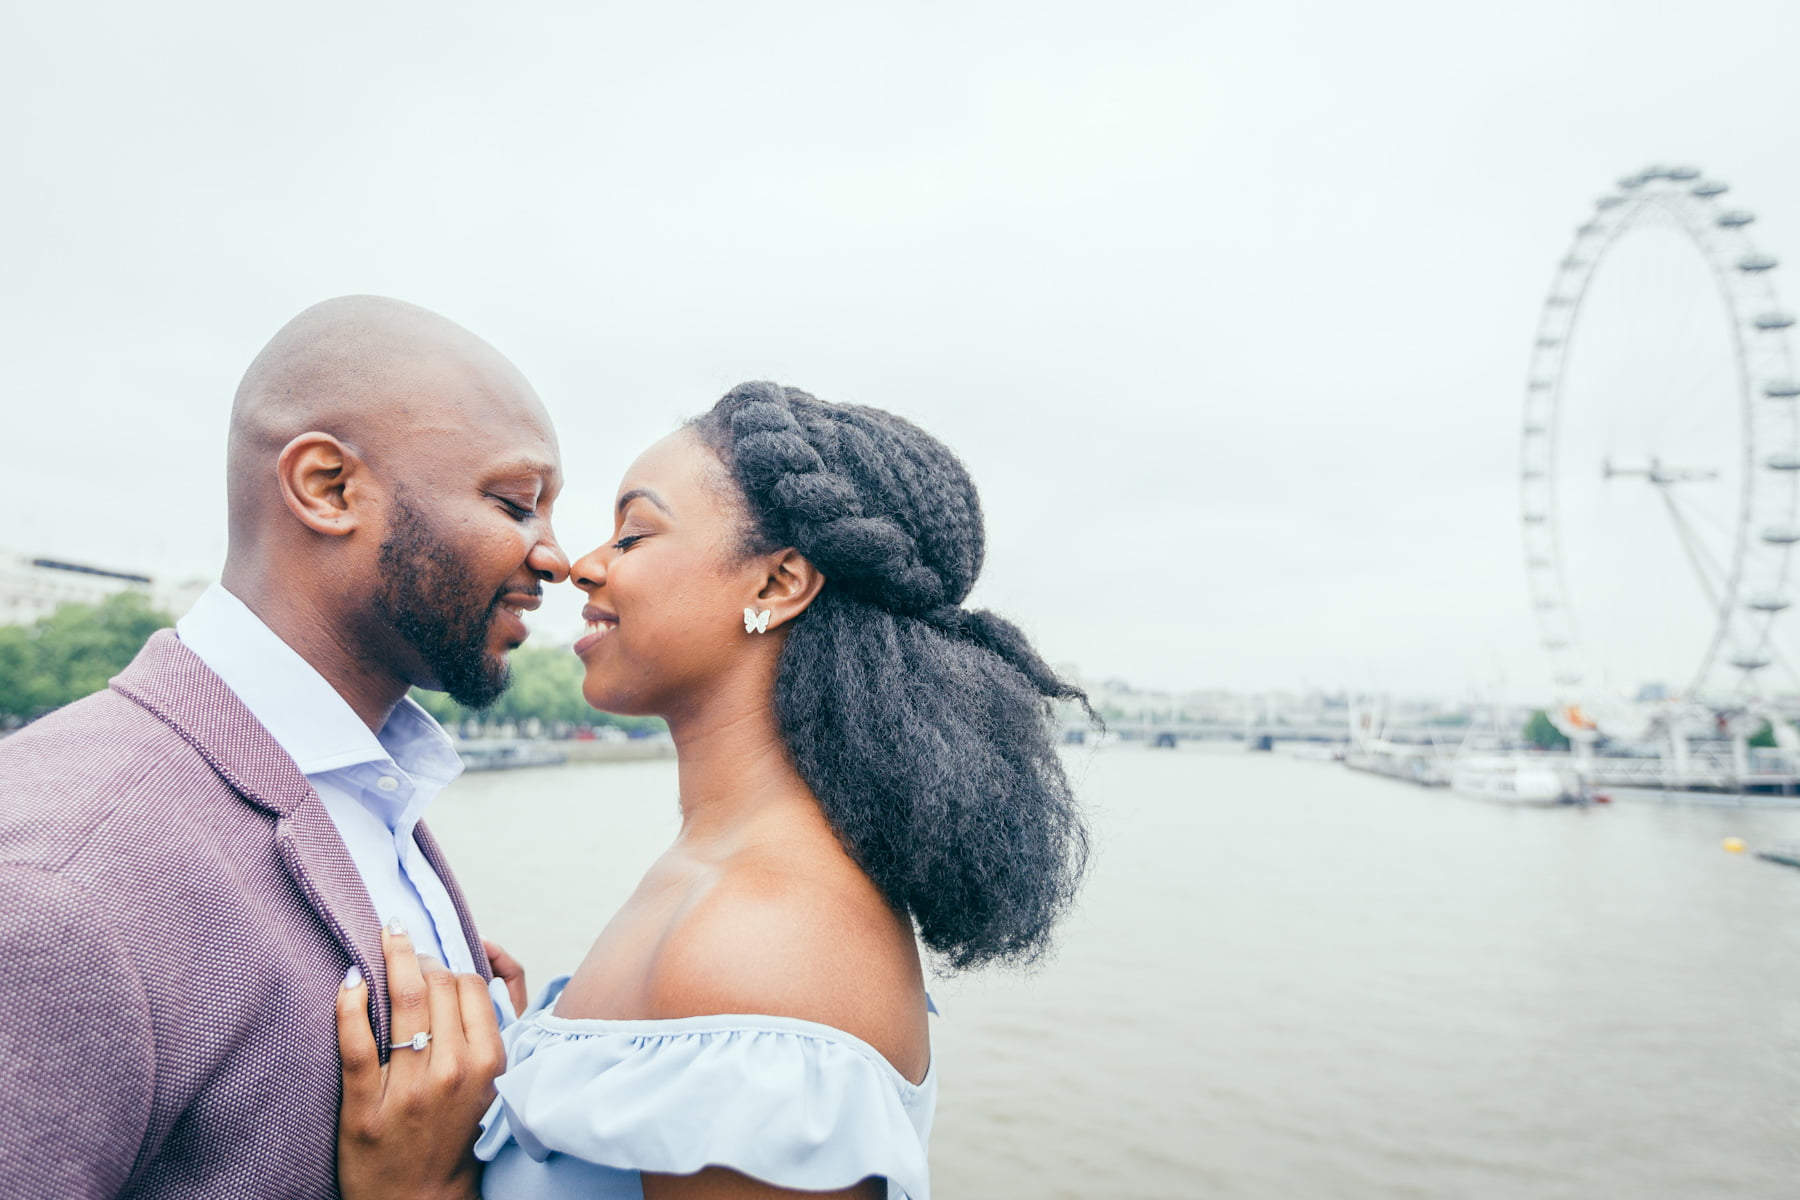 Engagement photography service with a lovely Nigerian couple in Westminster, St James Park, London